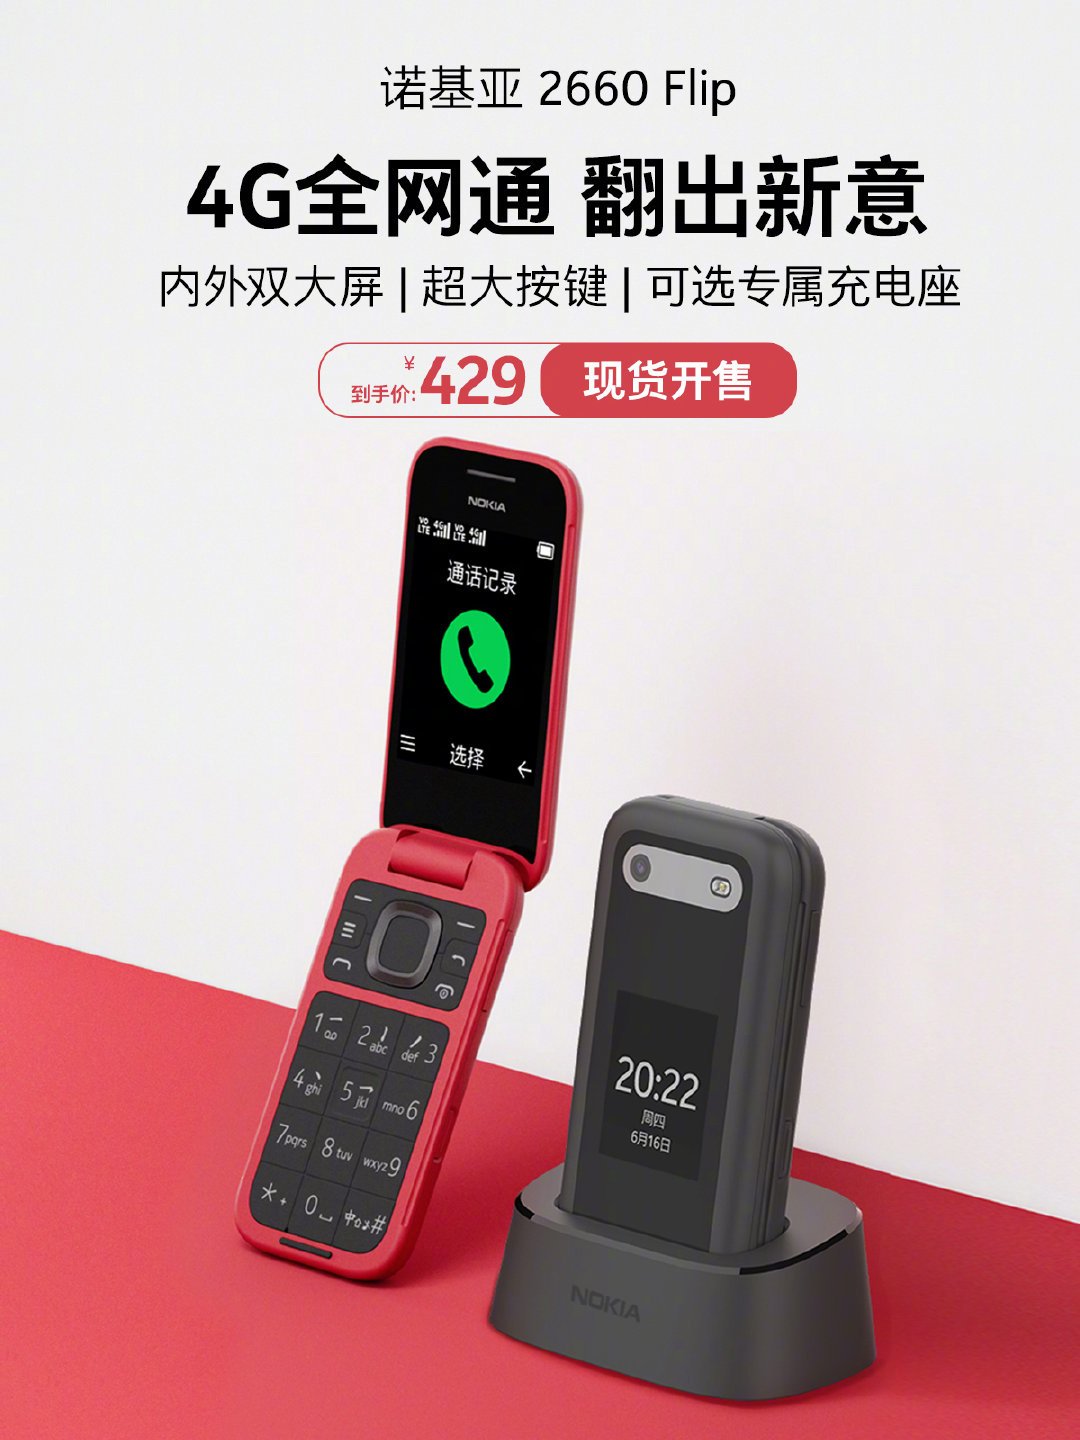 Nokia 2660 Flip Launch and Sale in China